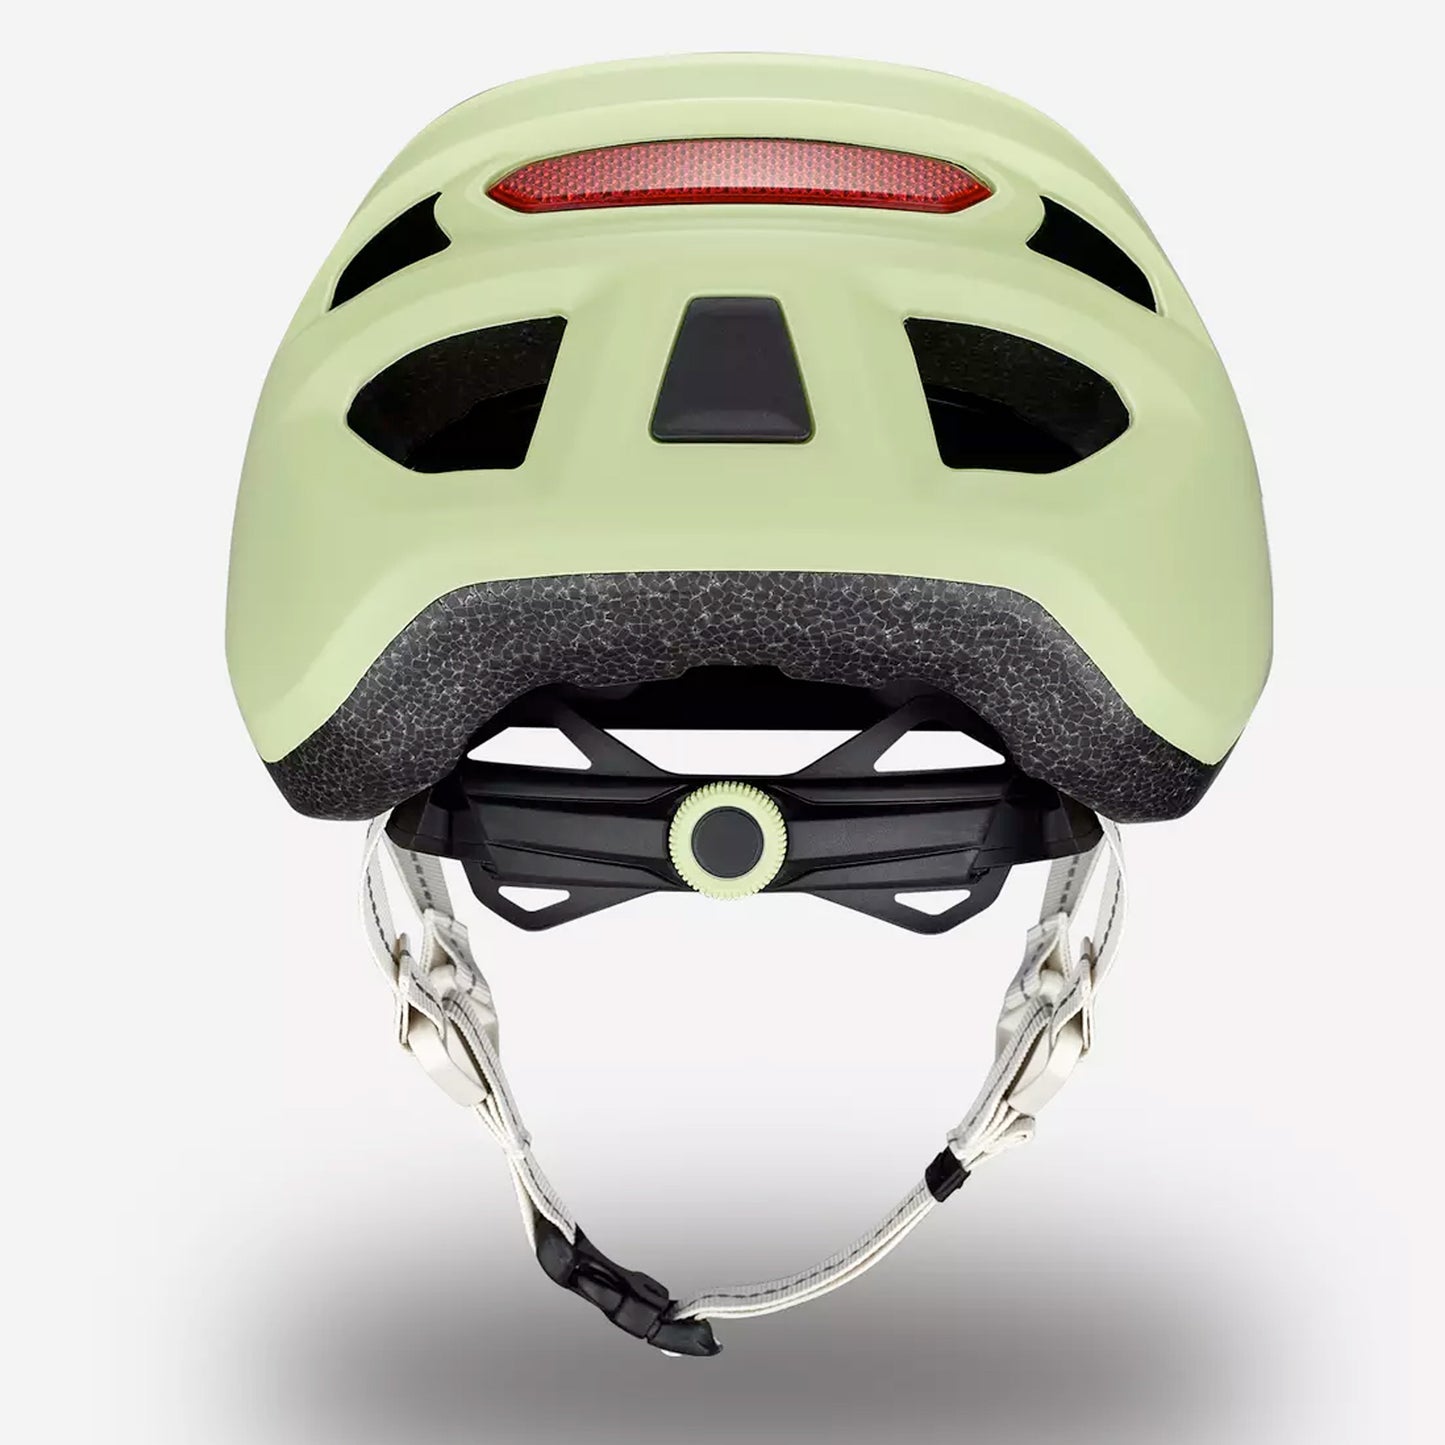 Specialized Shuffle 2 Children's Helmet with MIPS, Limestone